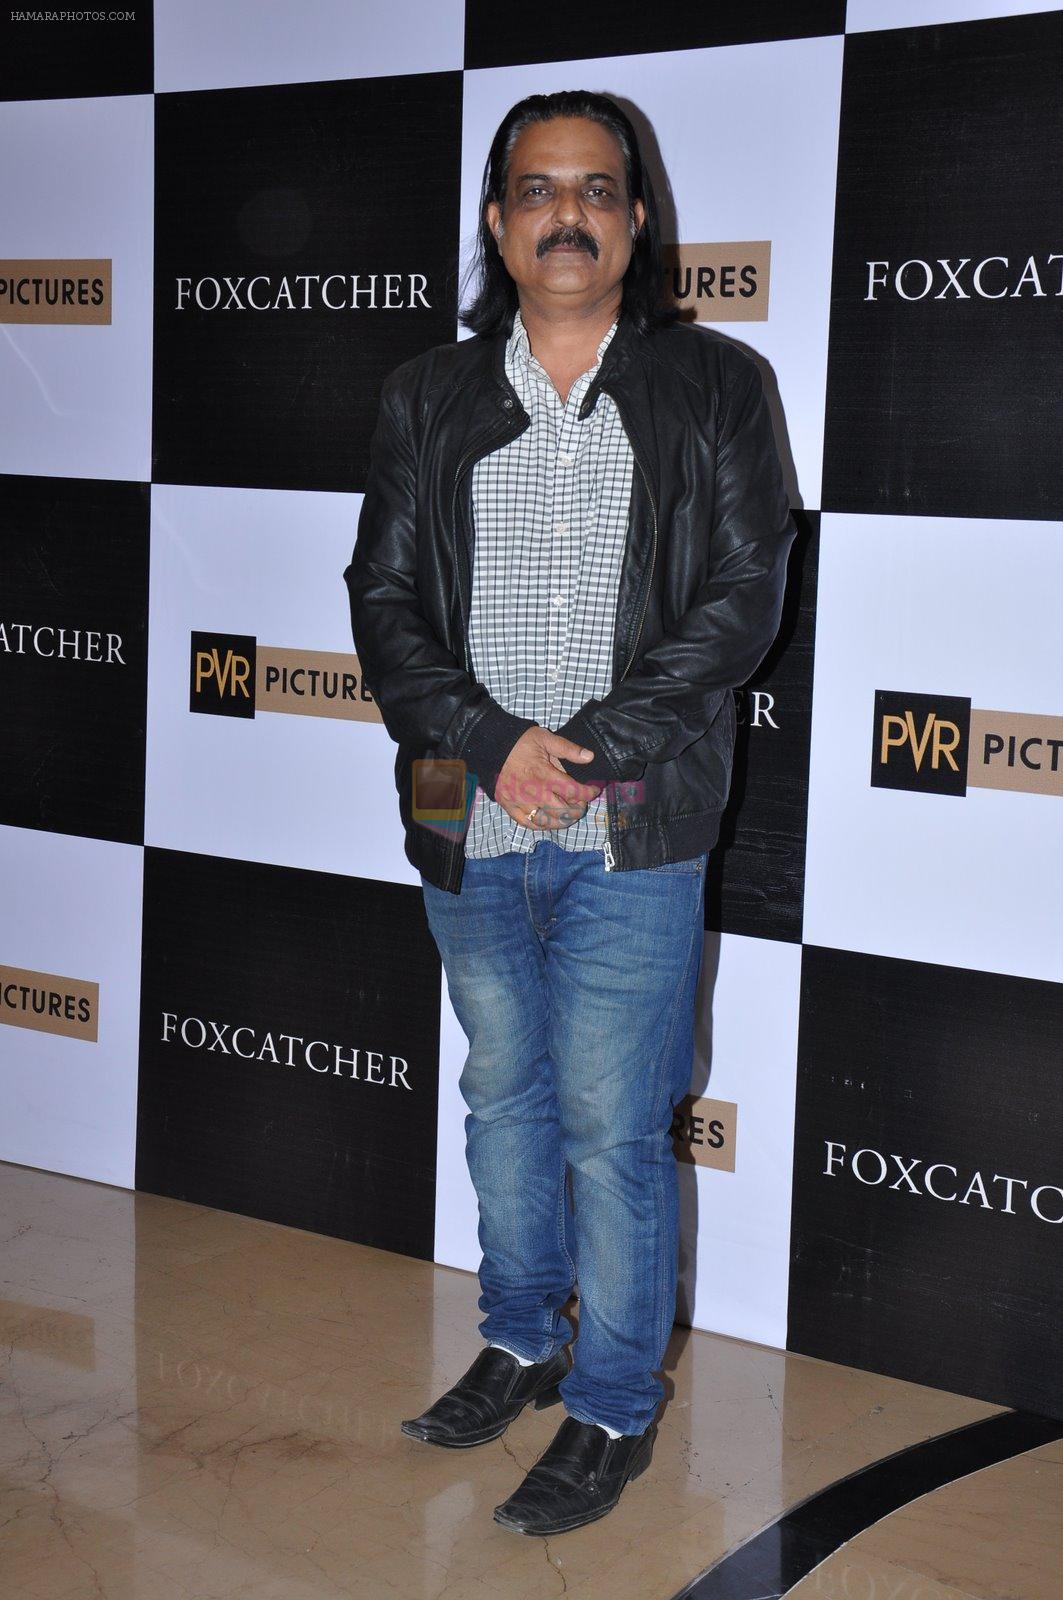 snapped at Foxcatcher premiere in PVR, Mumbai on 28th Jan 2015